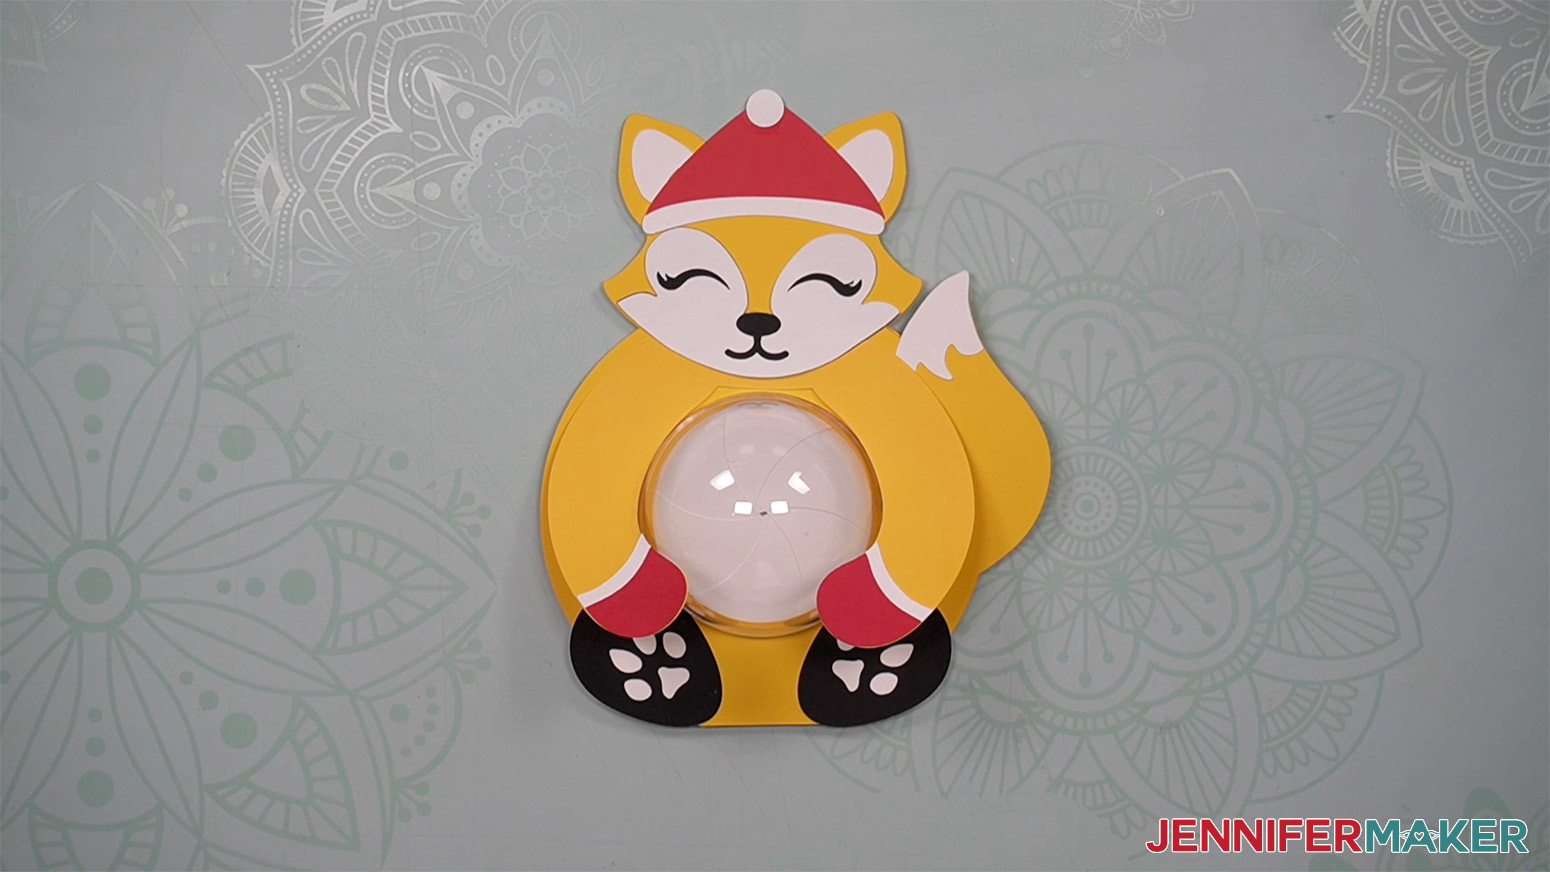 Image showing the paws of the fox placed in the correct location on the body of the fox candy holder.